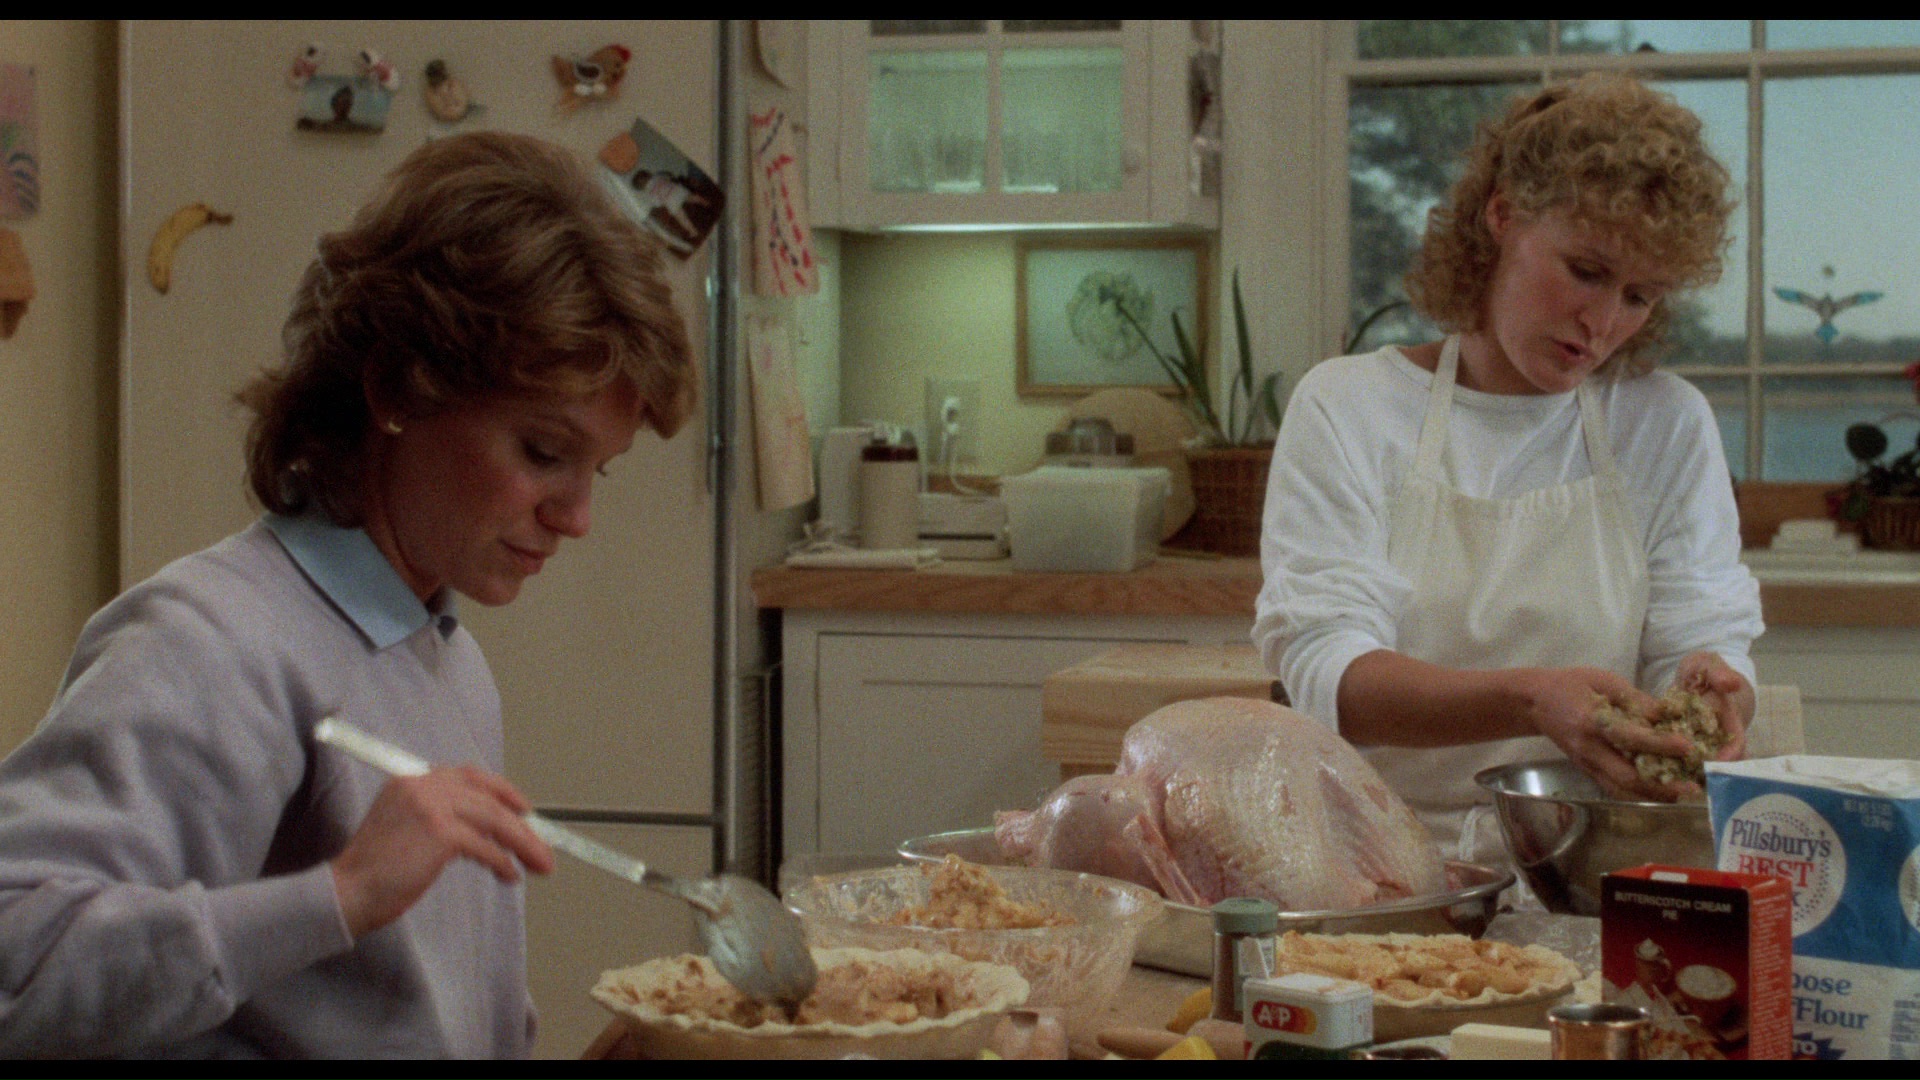 A&P and Pillsbury in The Big Chill (1983) Movie1920 x 1080